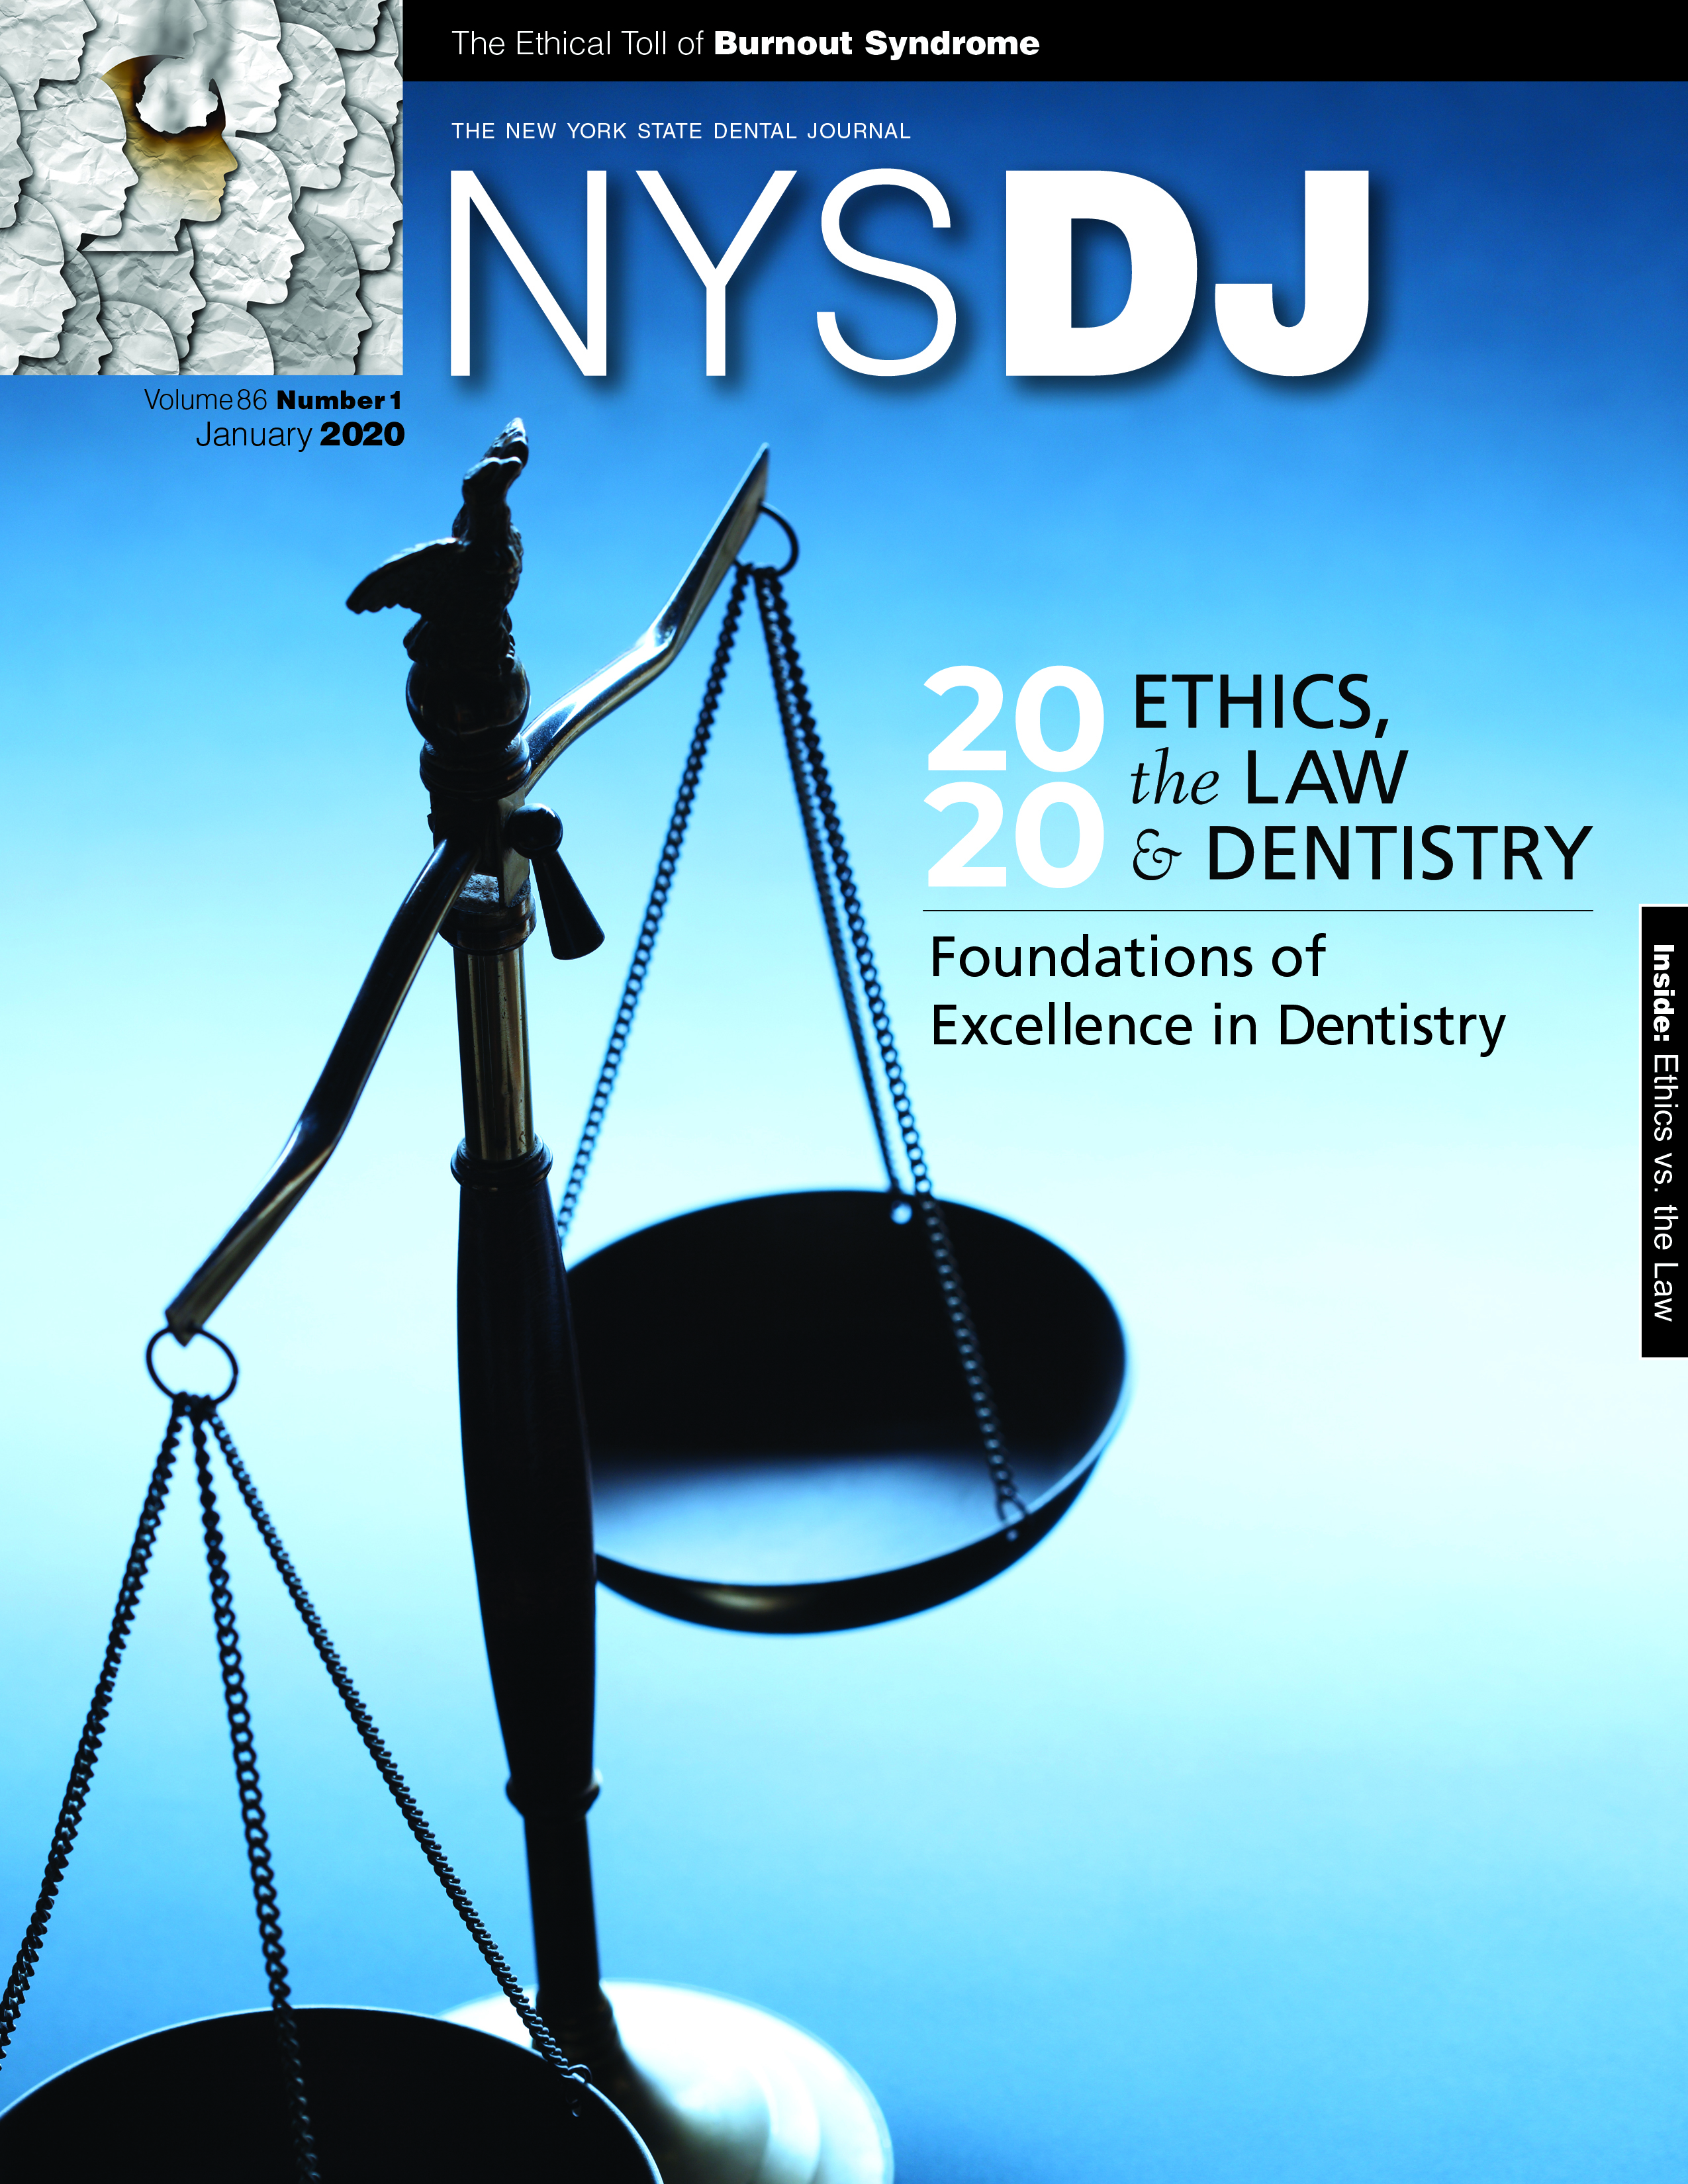 Cover of the NYSDJ with a photo of the scales of justice partially in frame